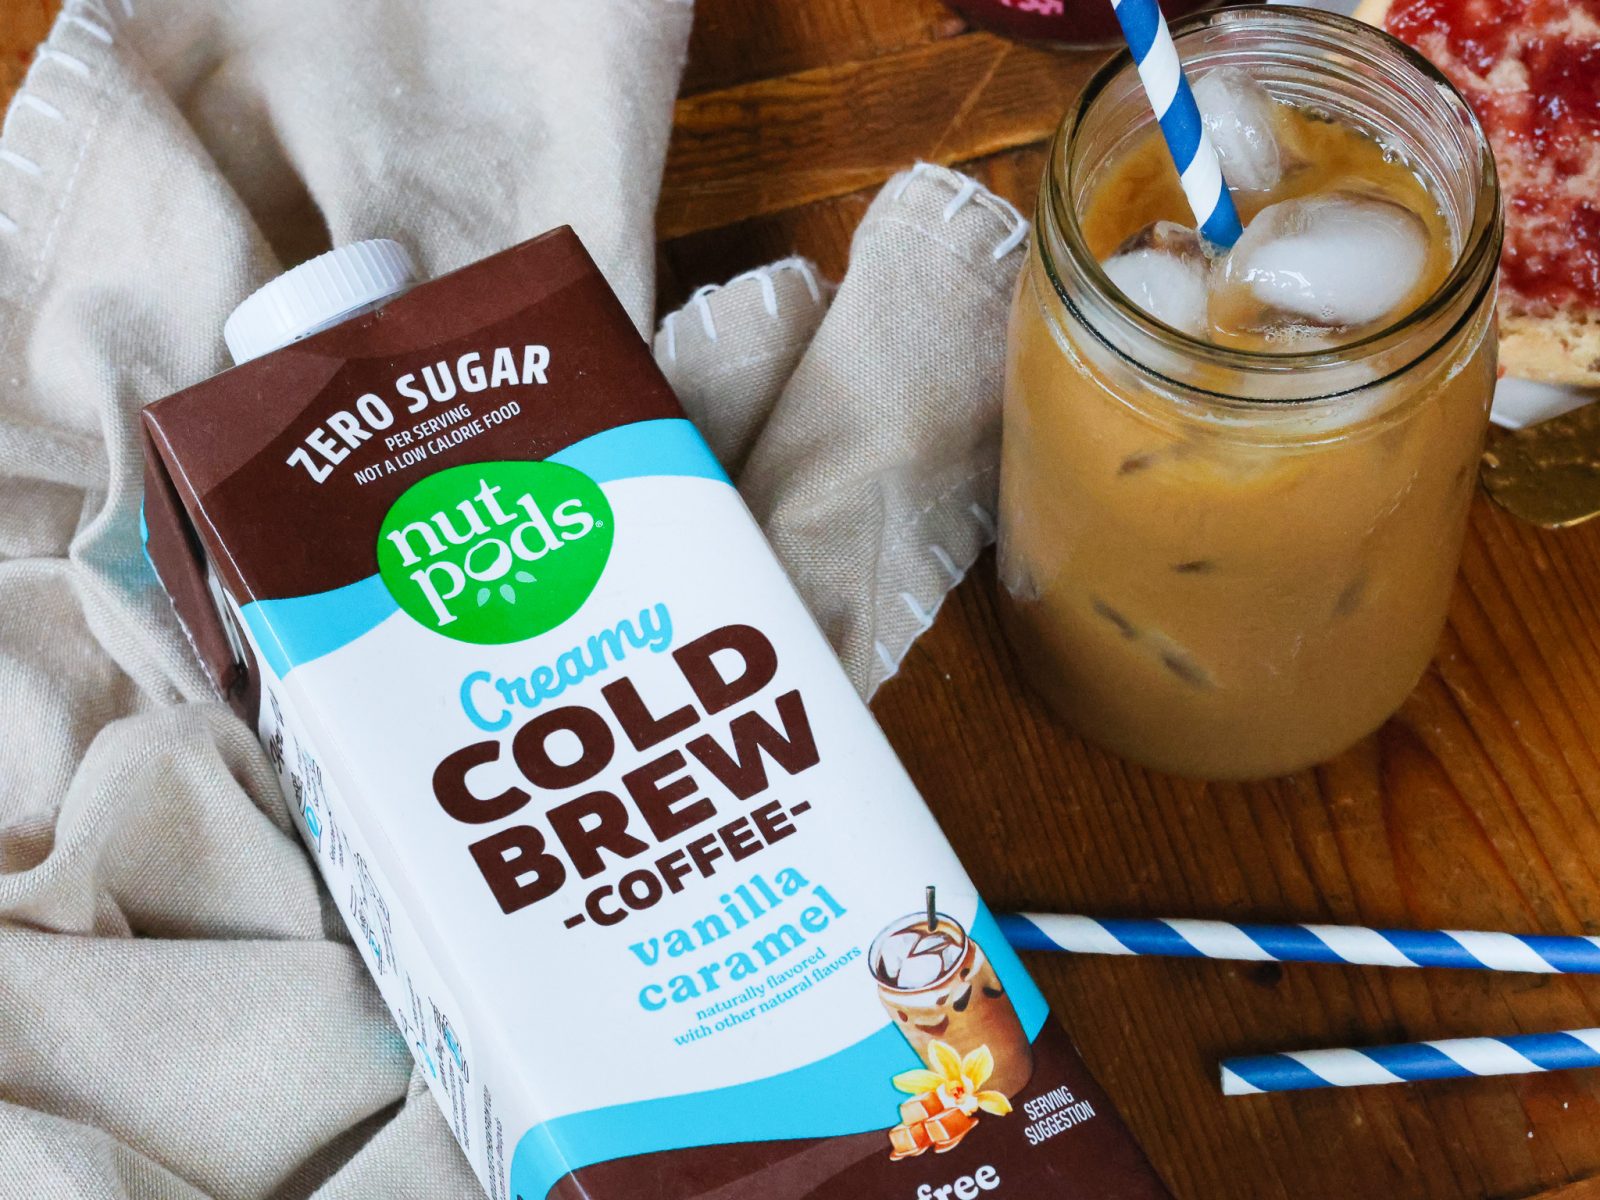 Nutpods Cold Brew Coffee As Low As $2.99 At Kroger (Regular Price $5.99)